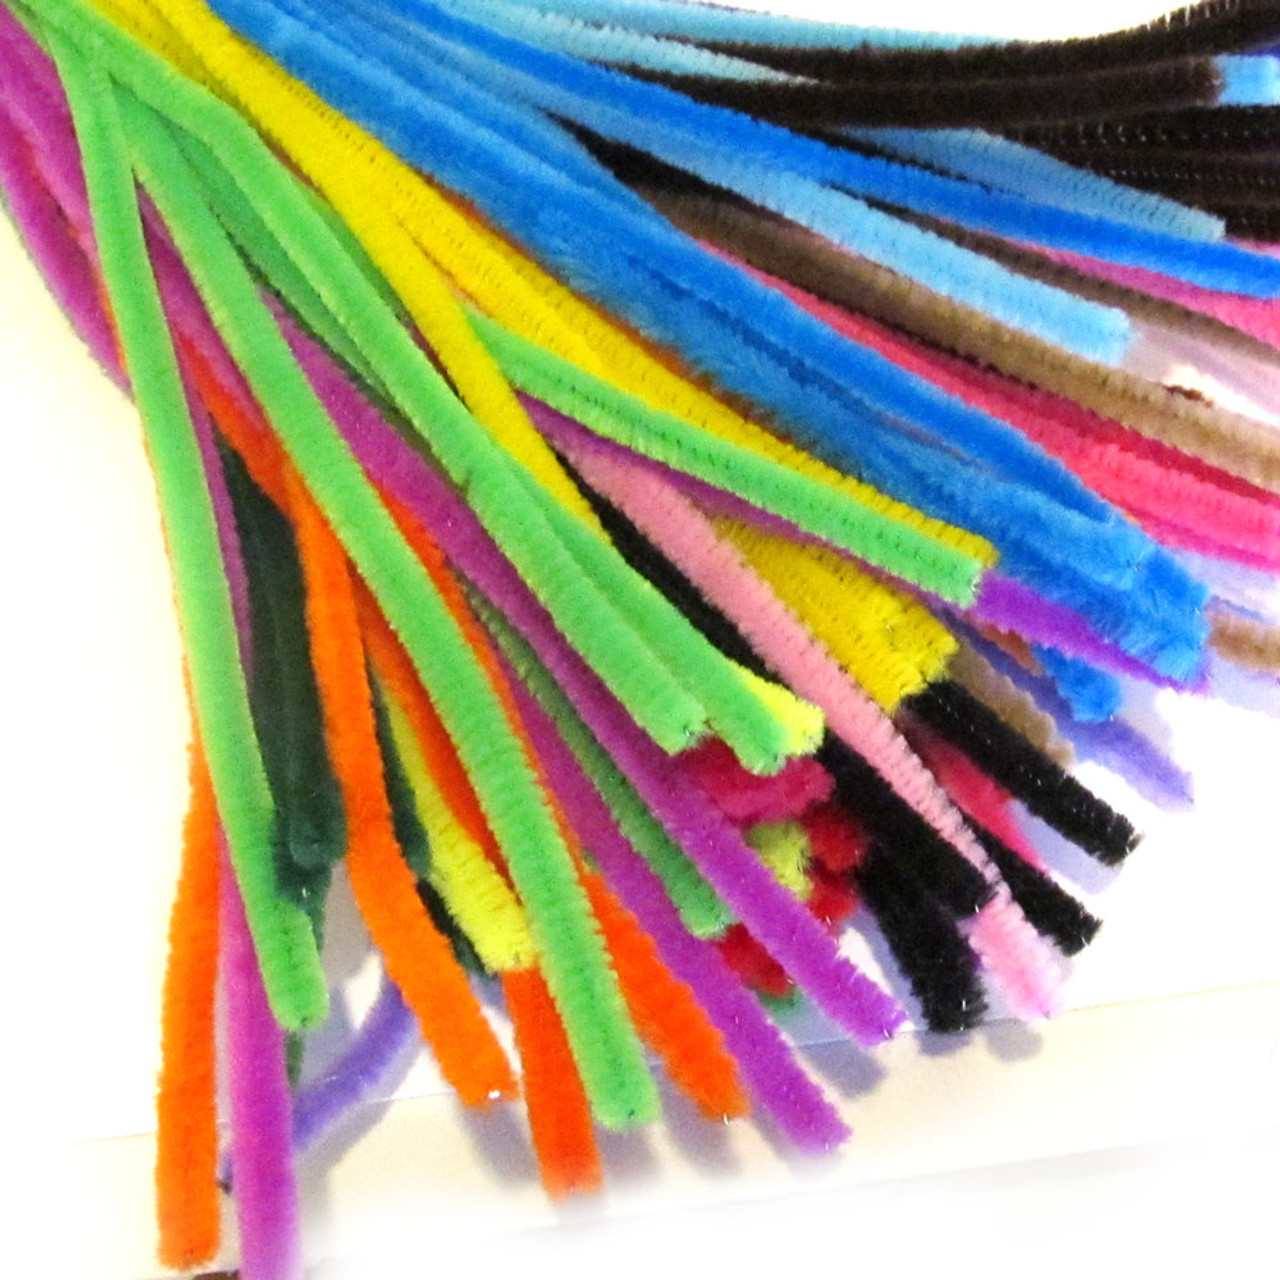 10, 20, 50 GIANT LARGE FLUFFY CHUNKY CRAFT PIPE CLEANERS STEMS